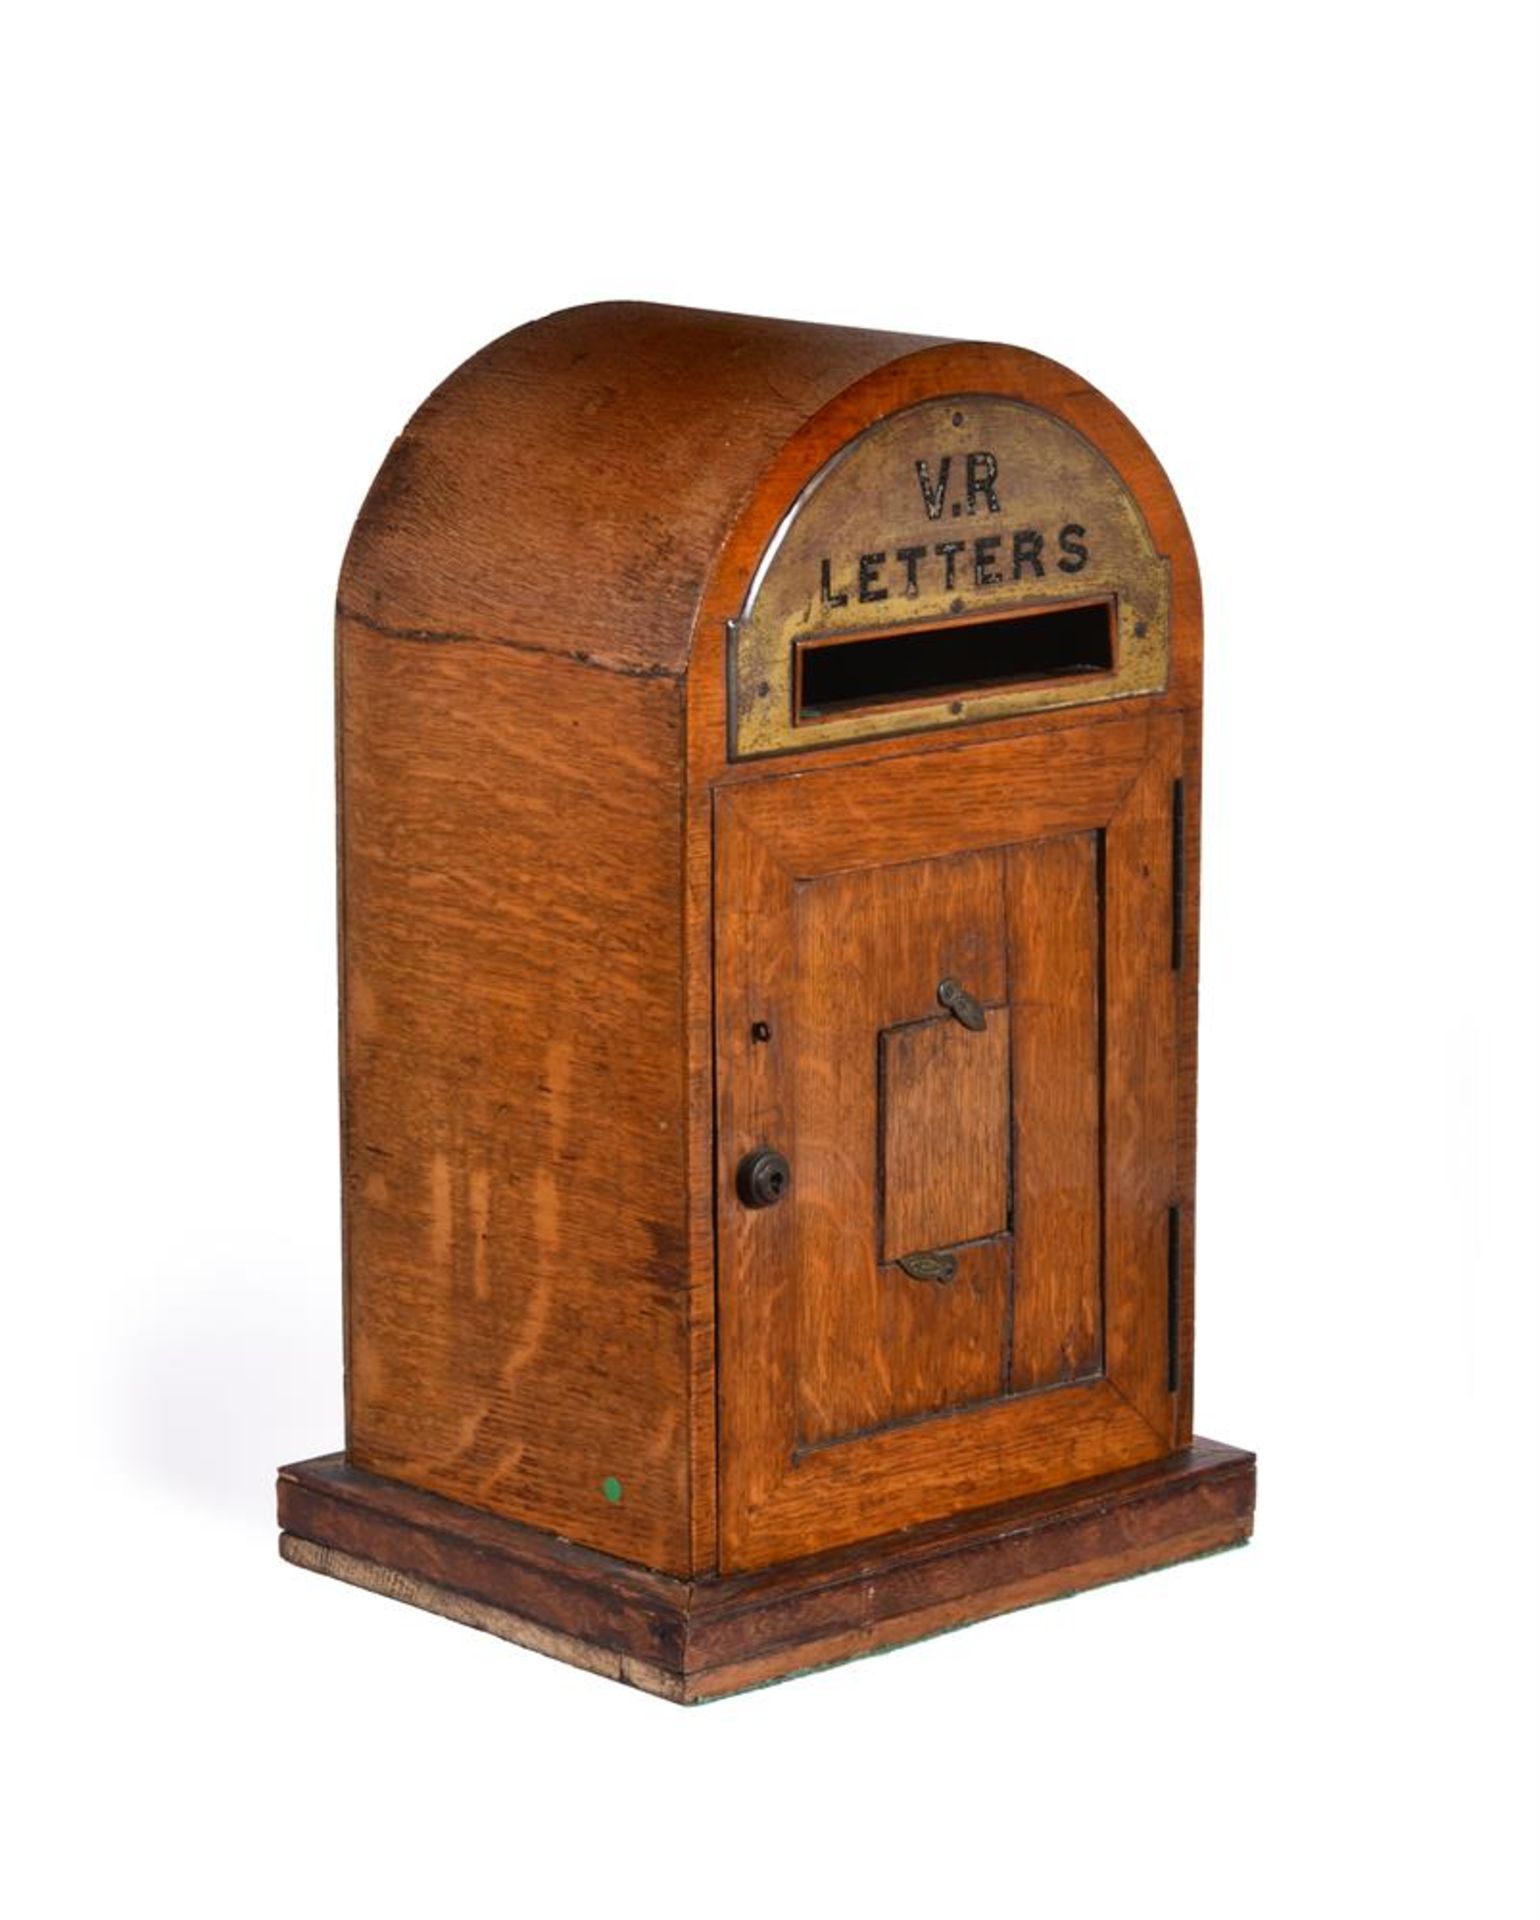 A VICTORIAN OAK AND GILT BRASS MOUNTED DOMESTIC POSTING BOX, SECOND HALF 19TH CENTURY